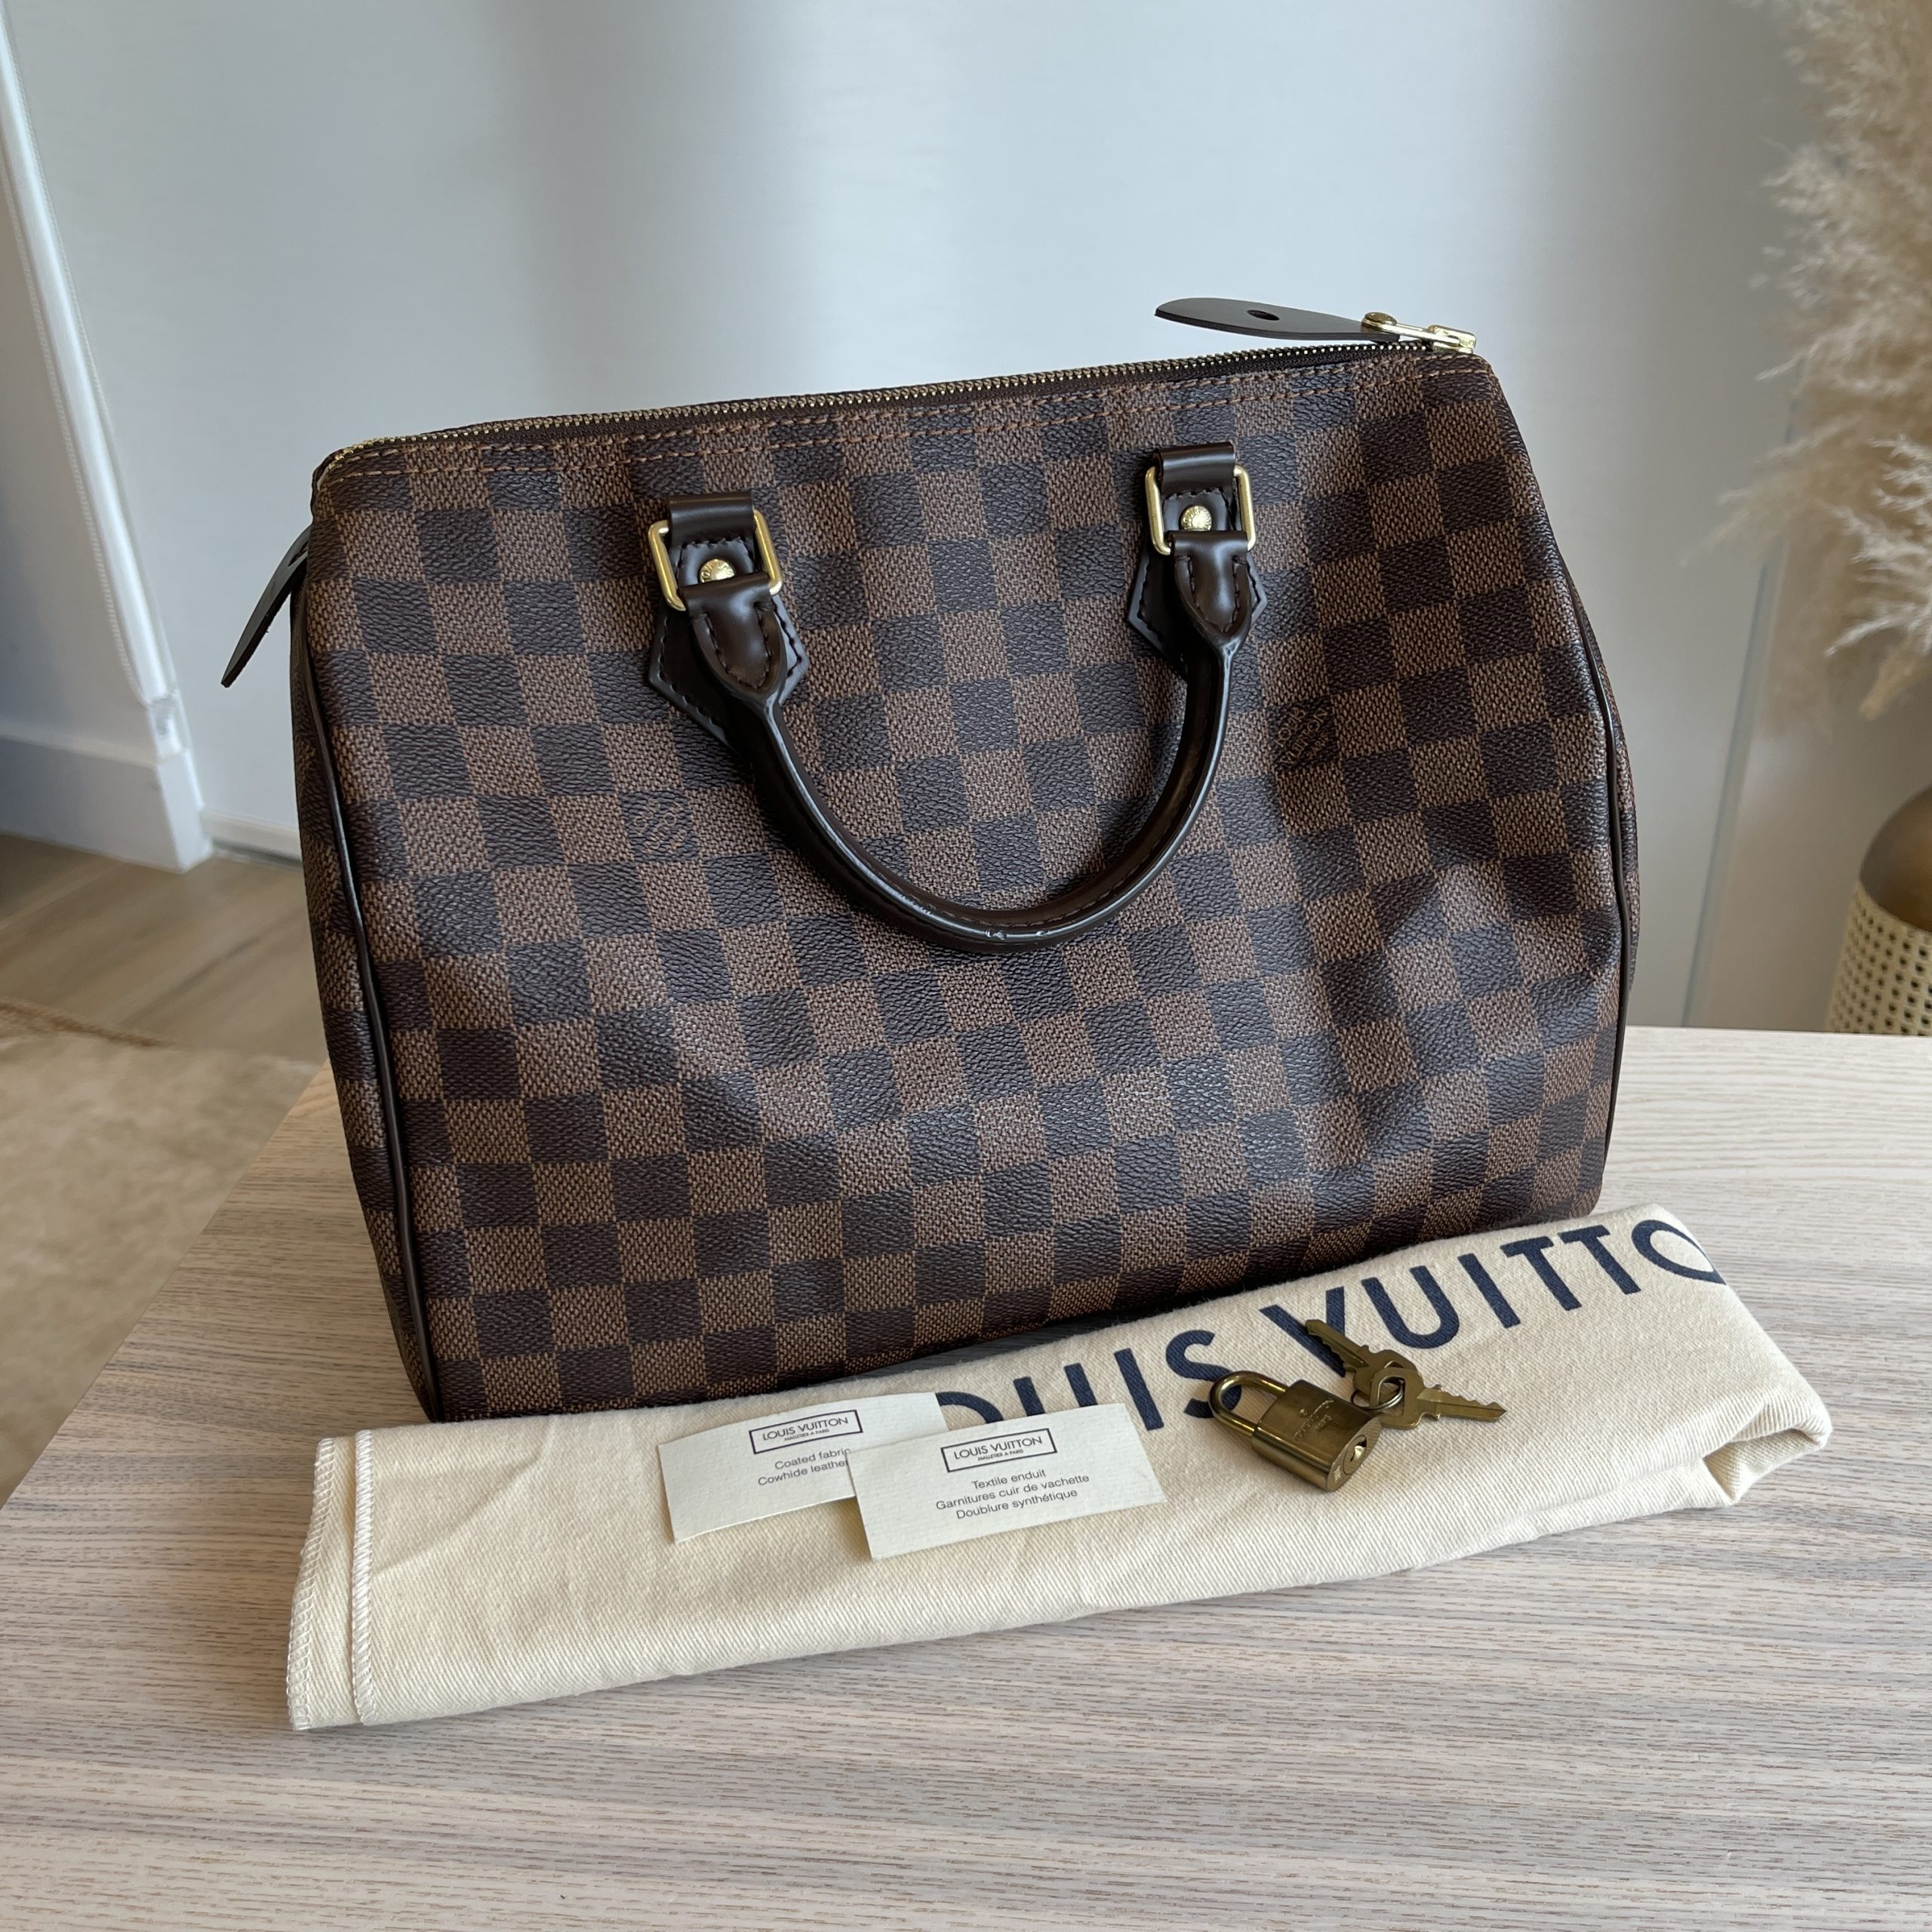 SOLD! Damier Ebene Speedy 30 in Excellent Condition with Dustbag